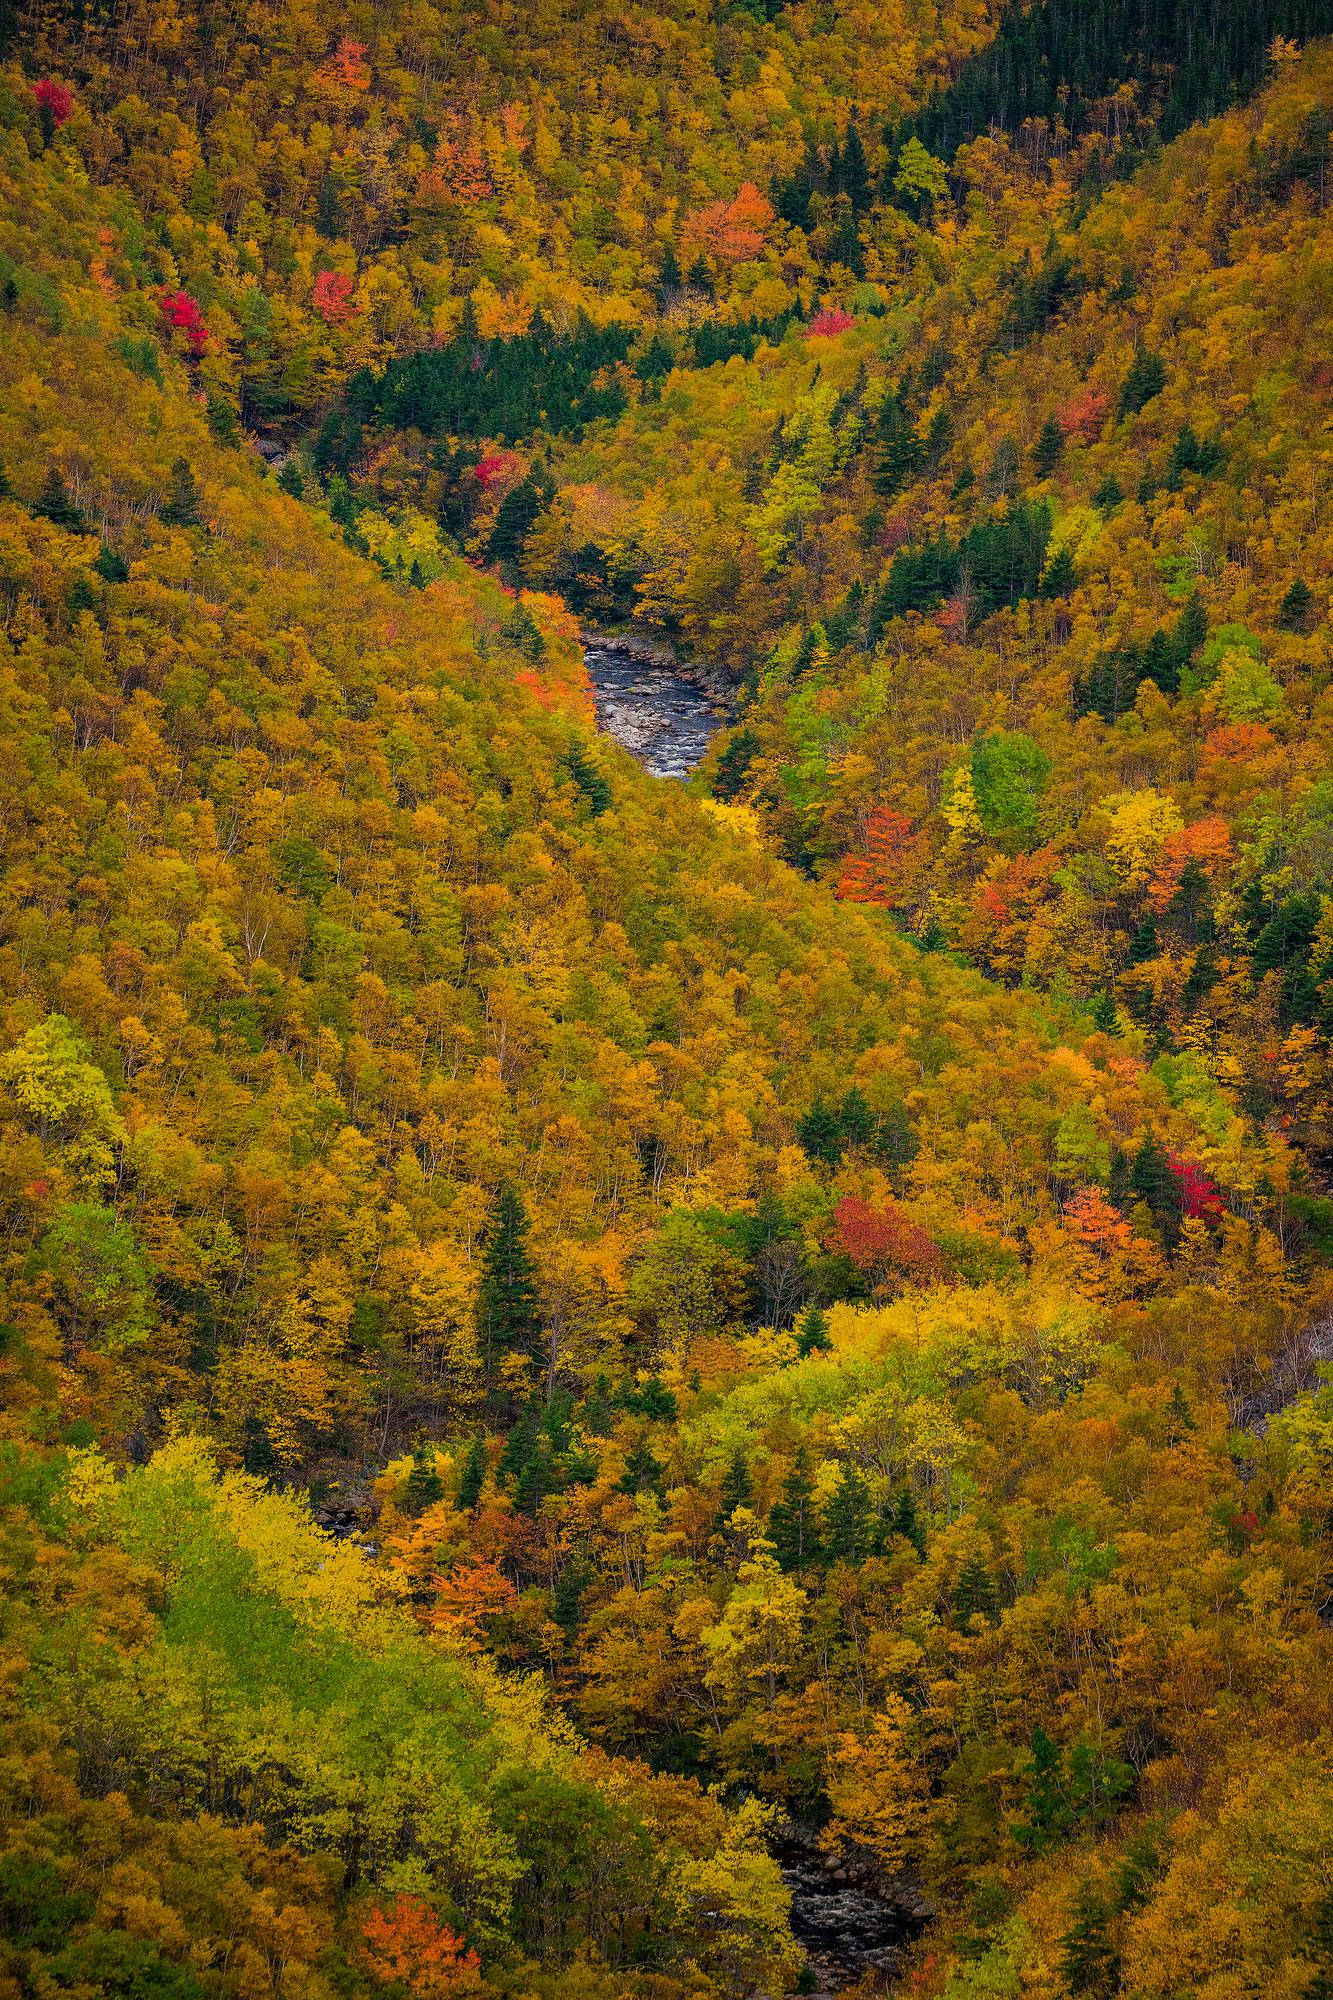 Fall in the Mackenzie River Valley